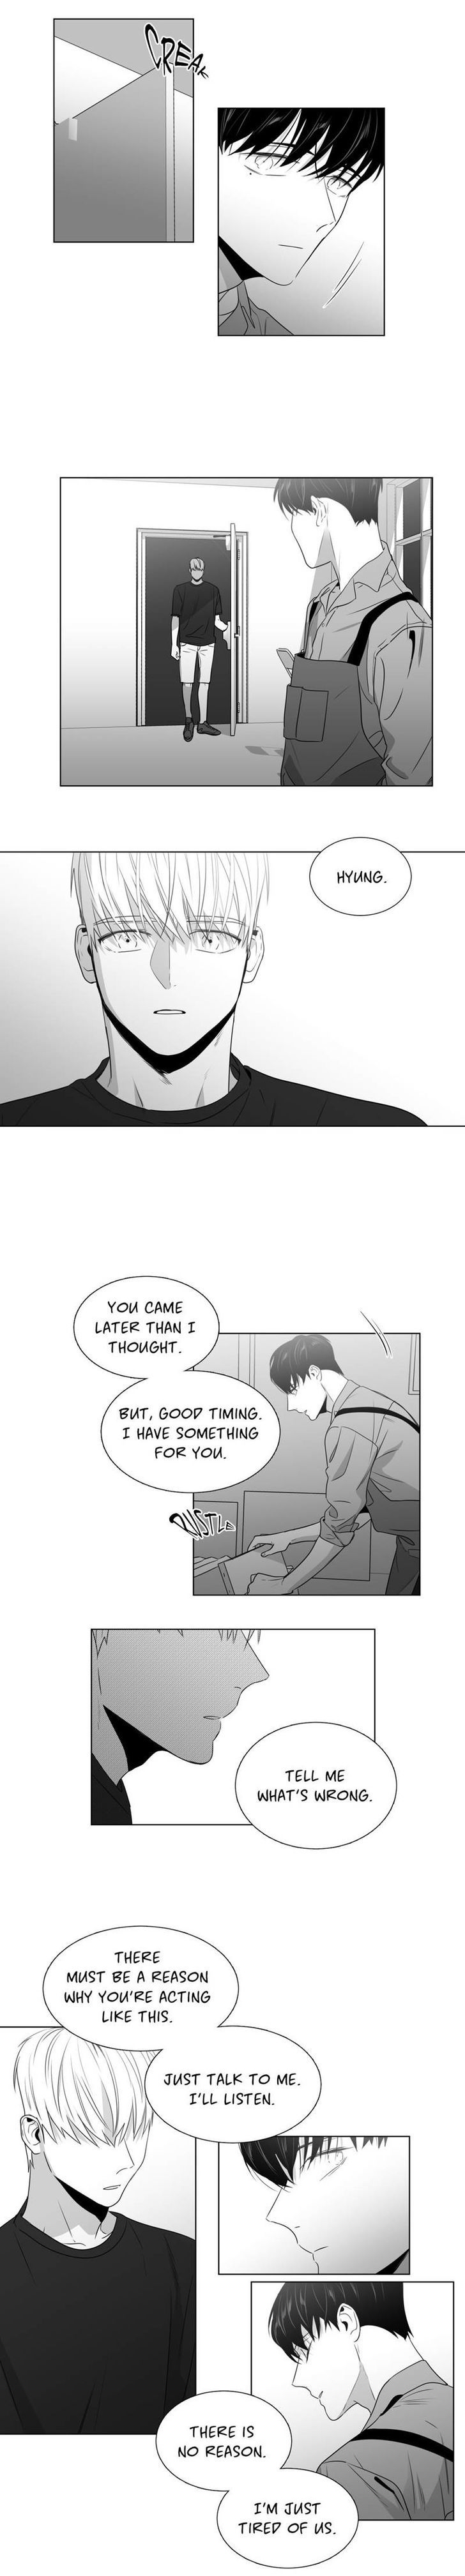 Lover Boy (Lezhin) Chapter 045 page 12